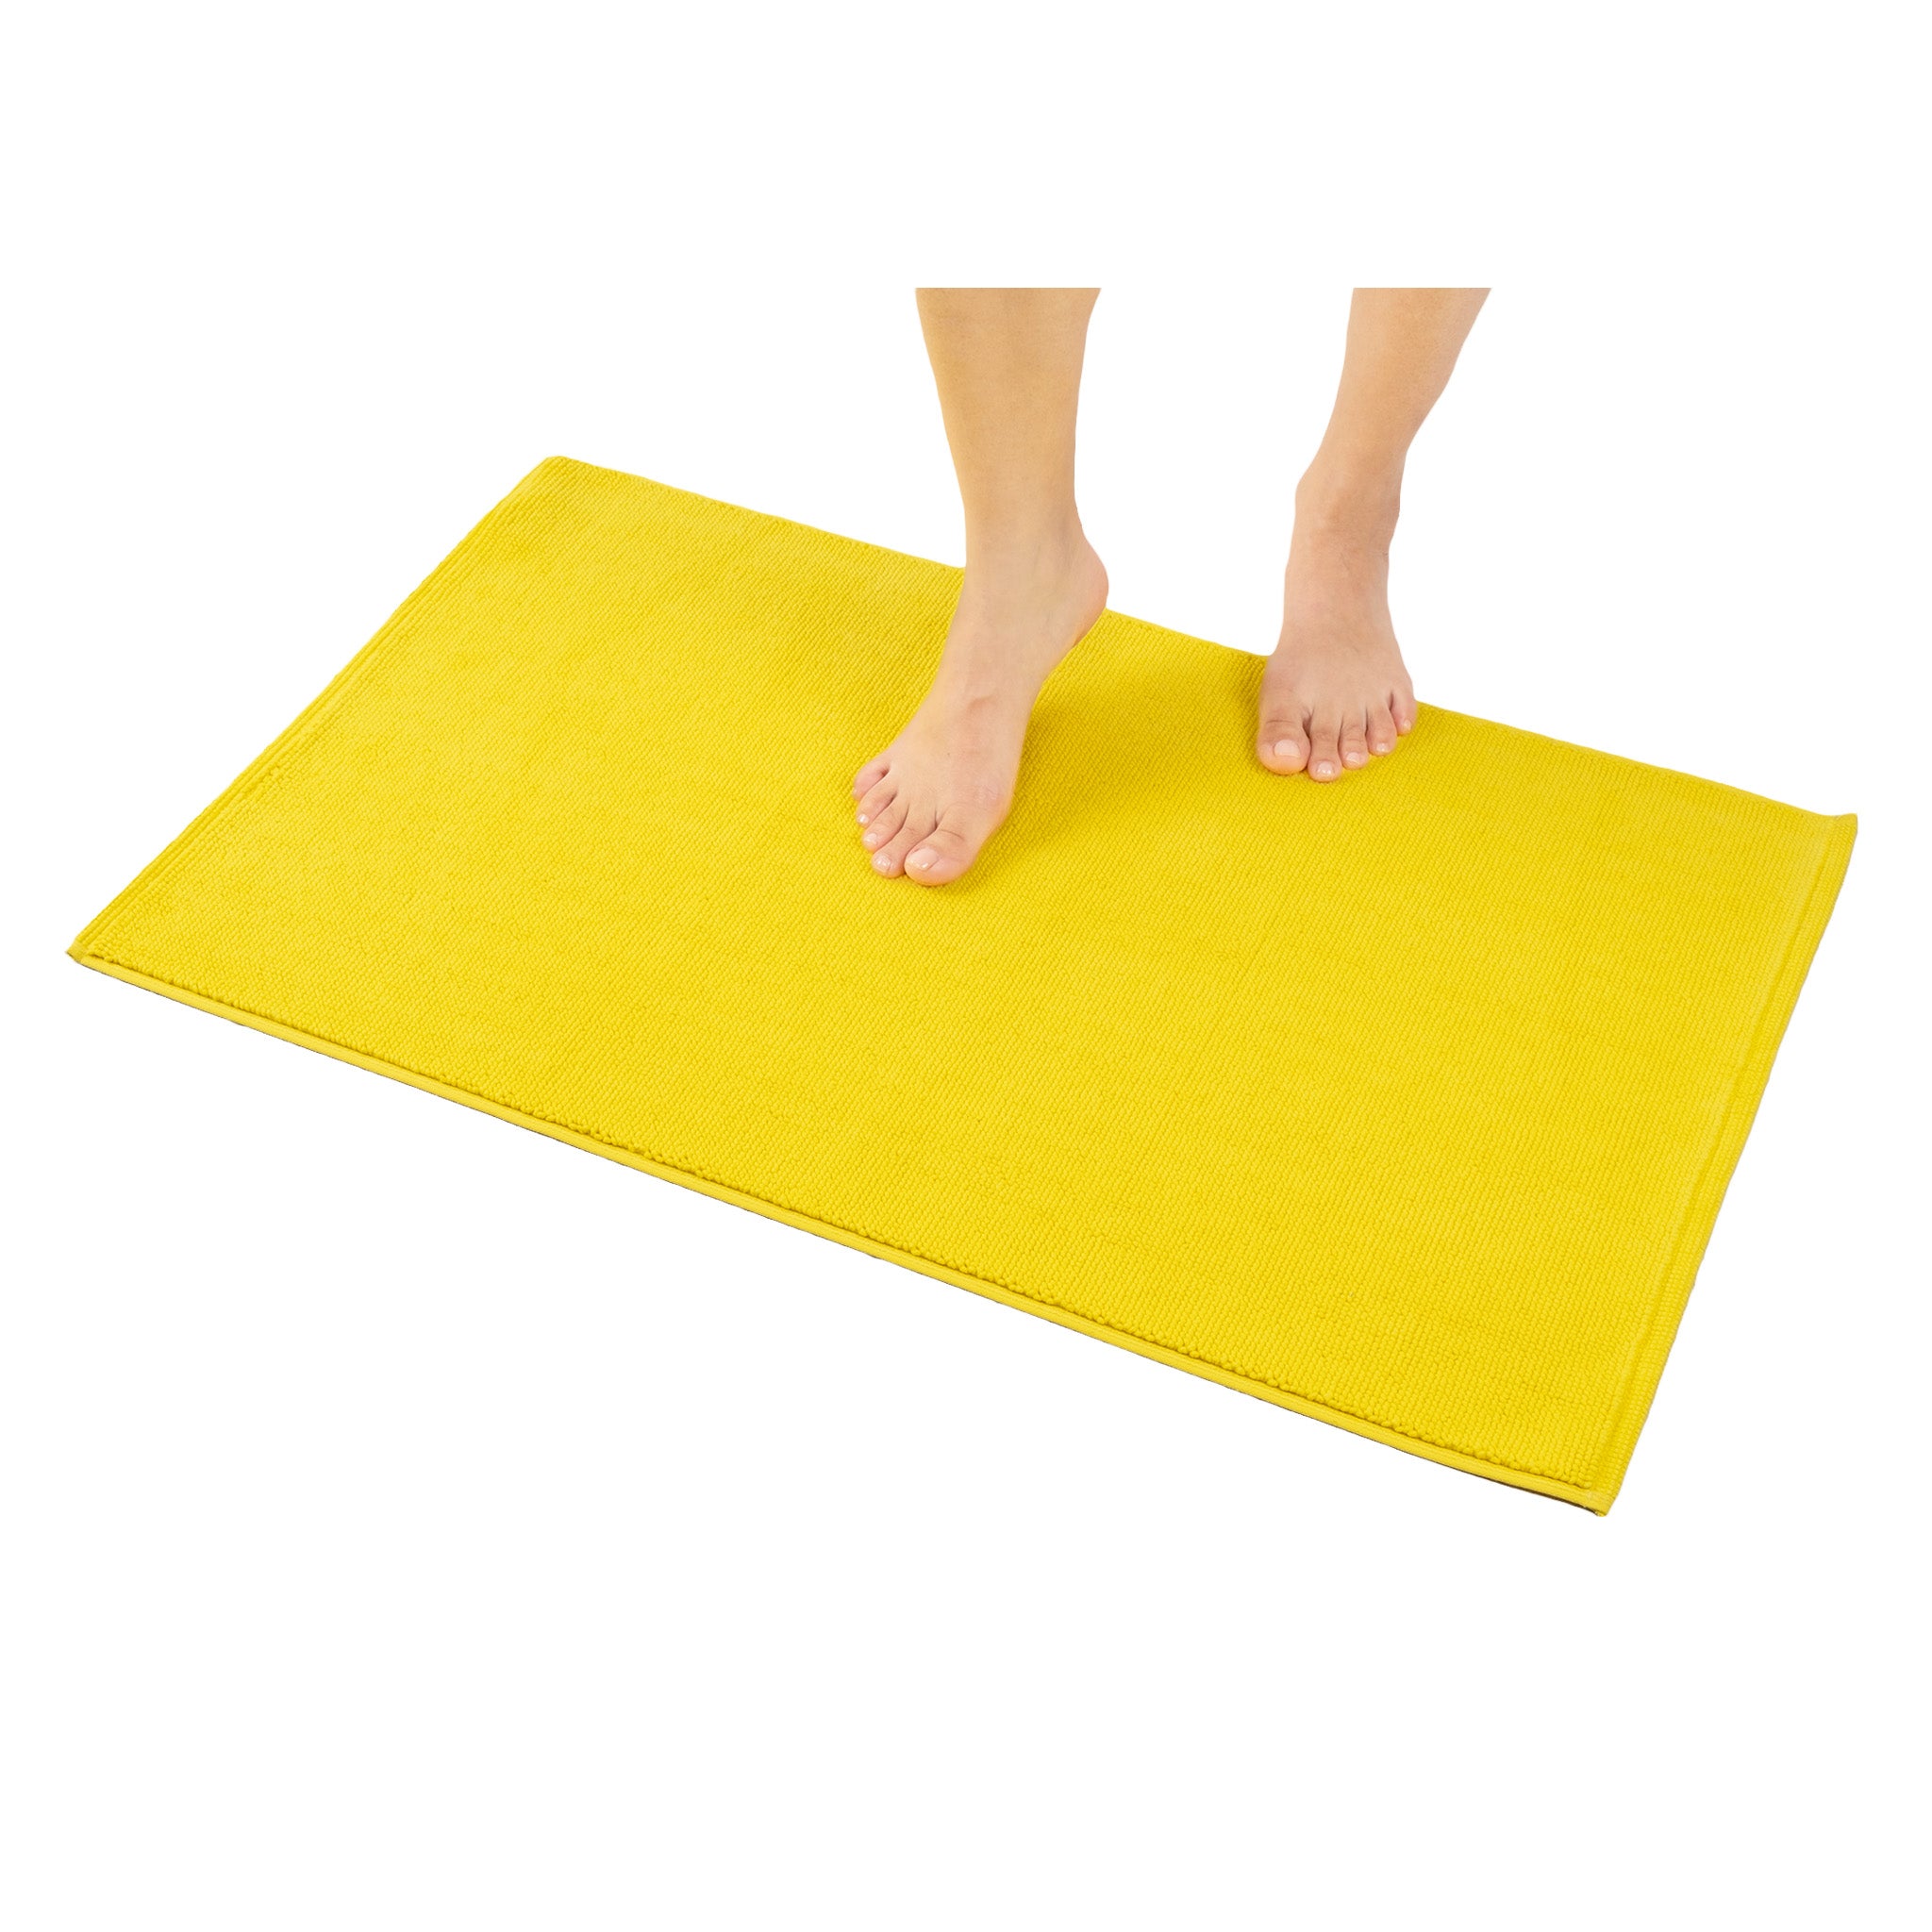 Ample Decor Luxurious Cotton 1350 GSM Bath Mats by - Pack of 2 Yellow 24 inch x 17 inch, Size: 24 x 17